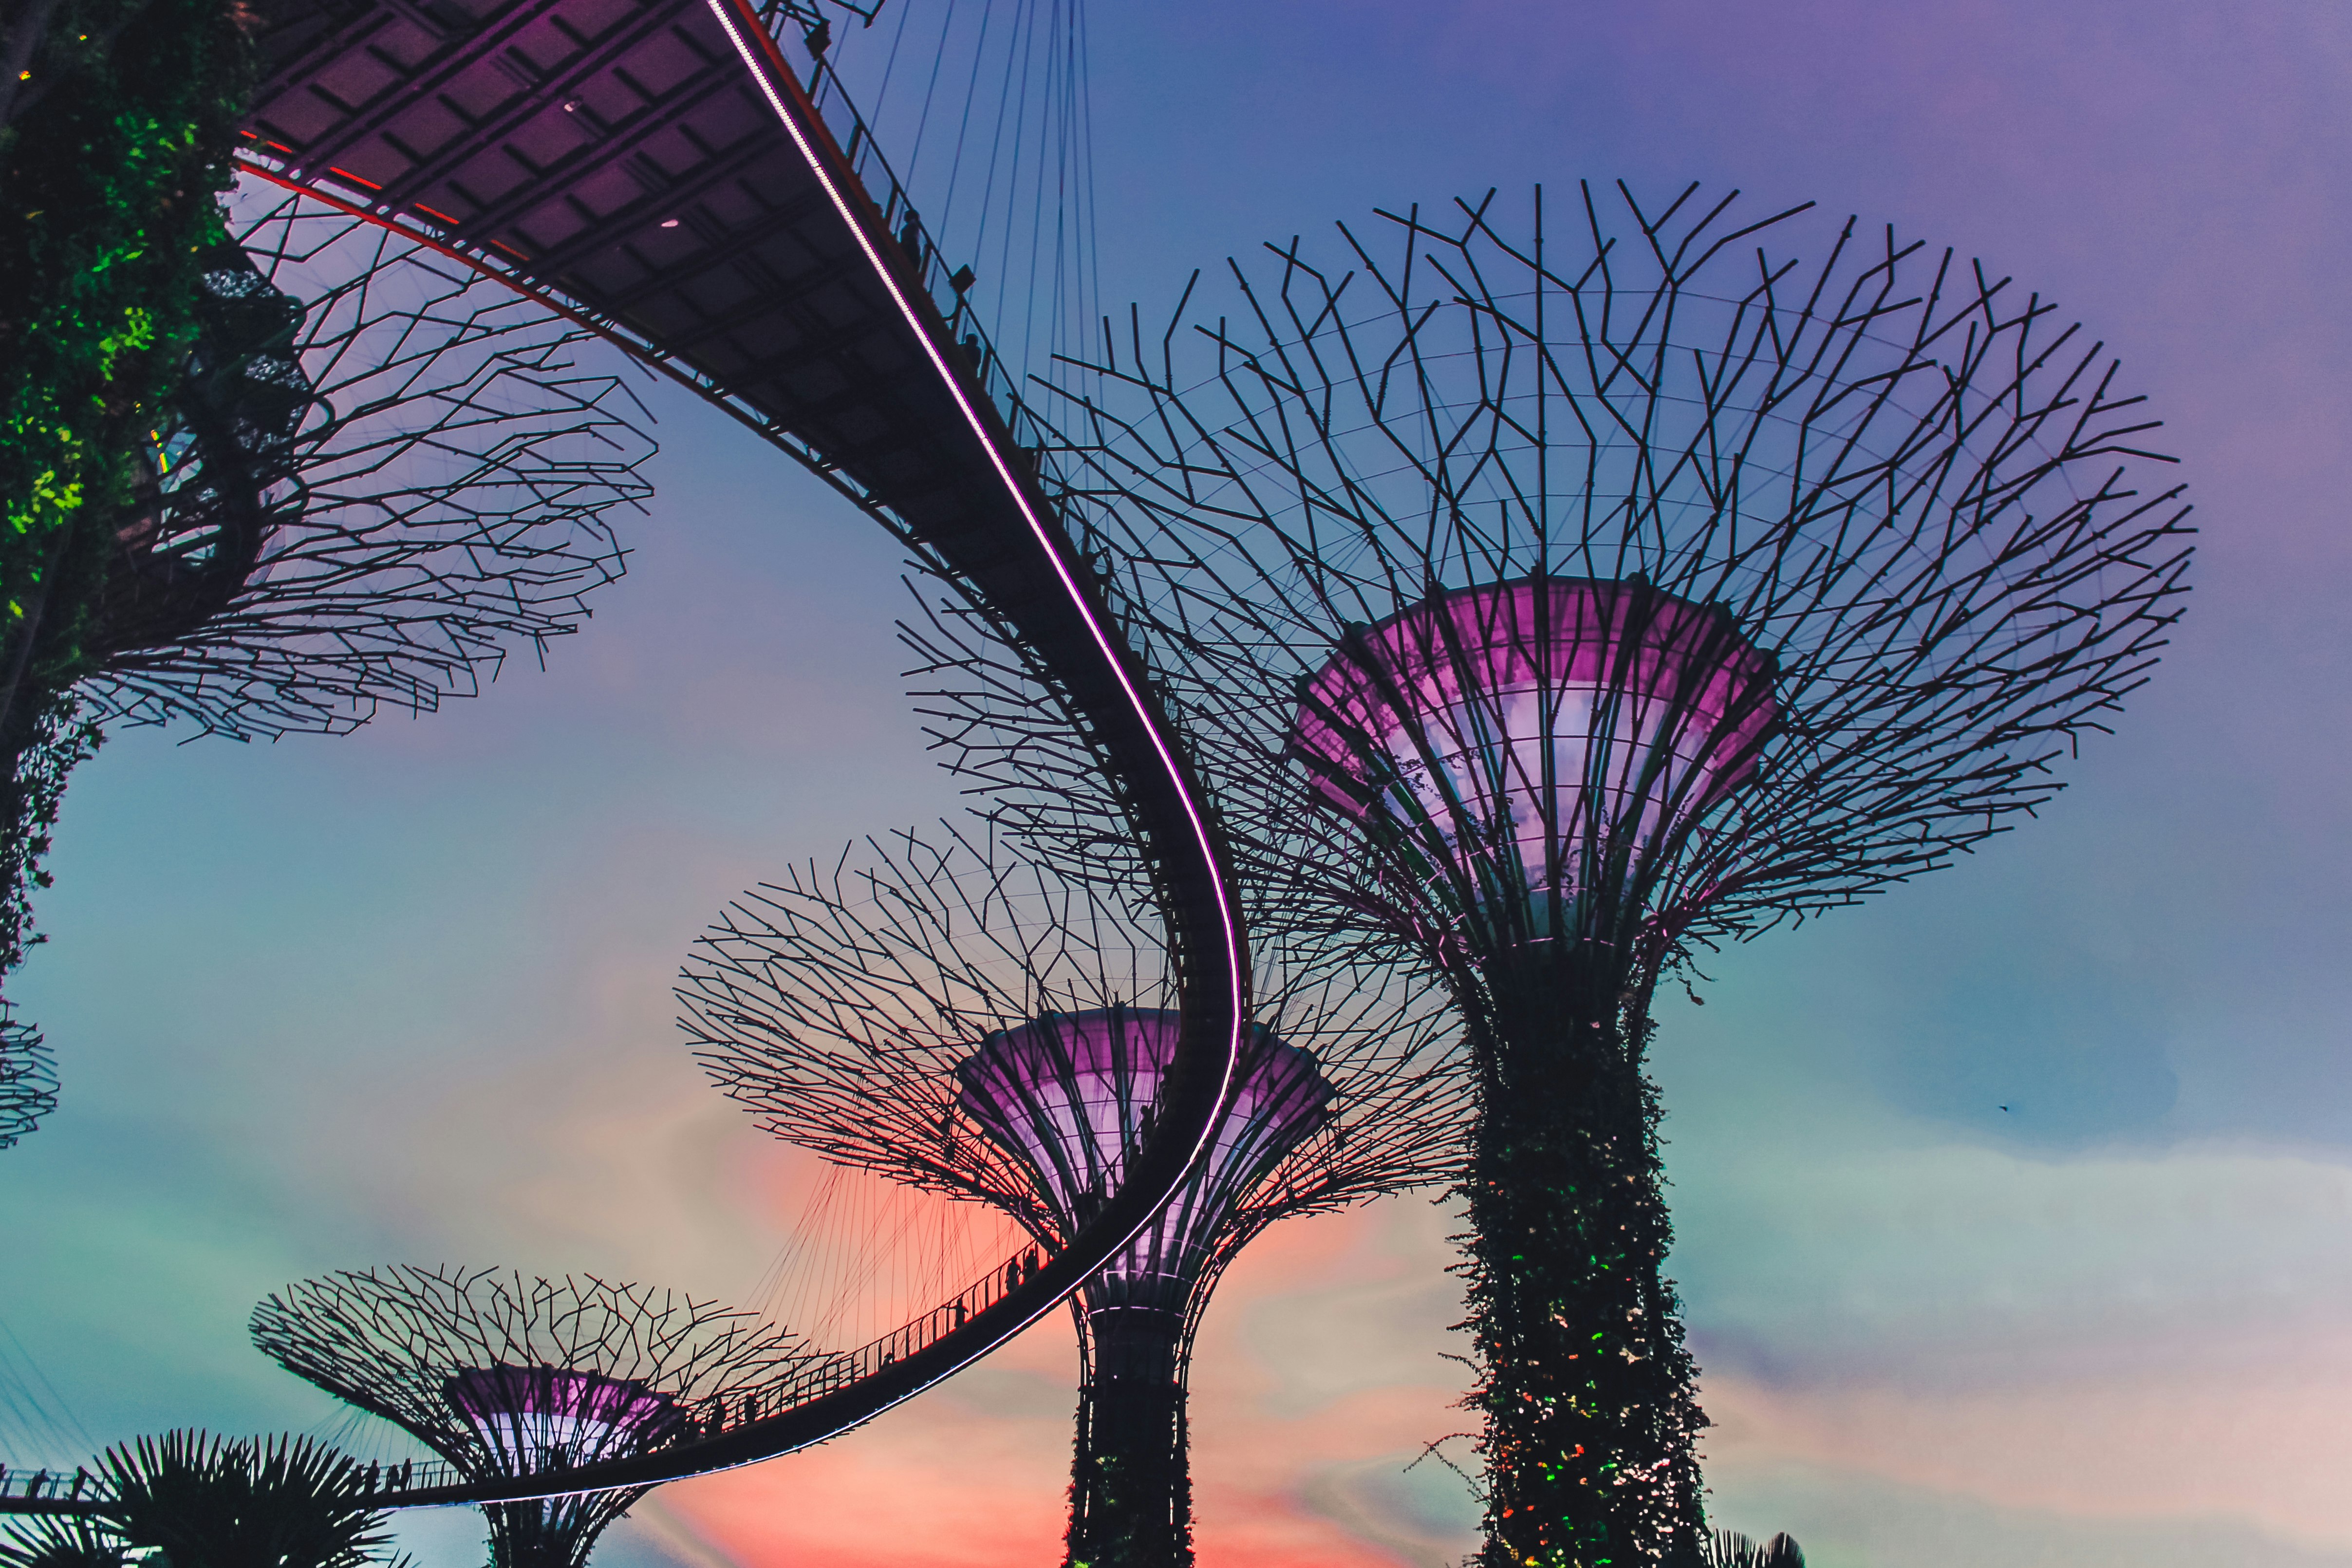 Sunset at Gardens by the Bay – Singapore